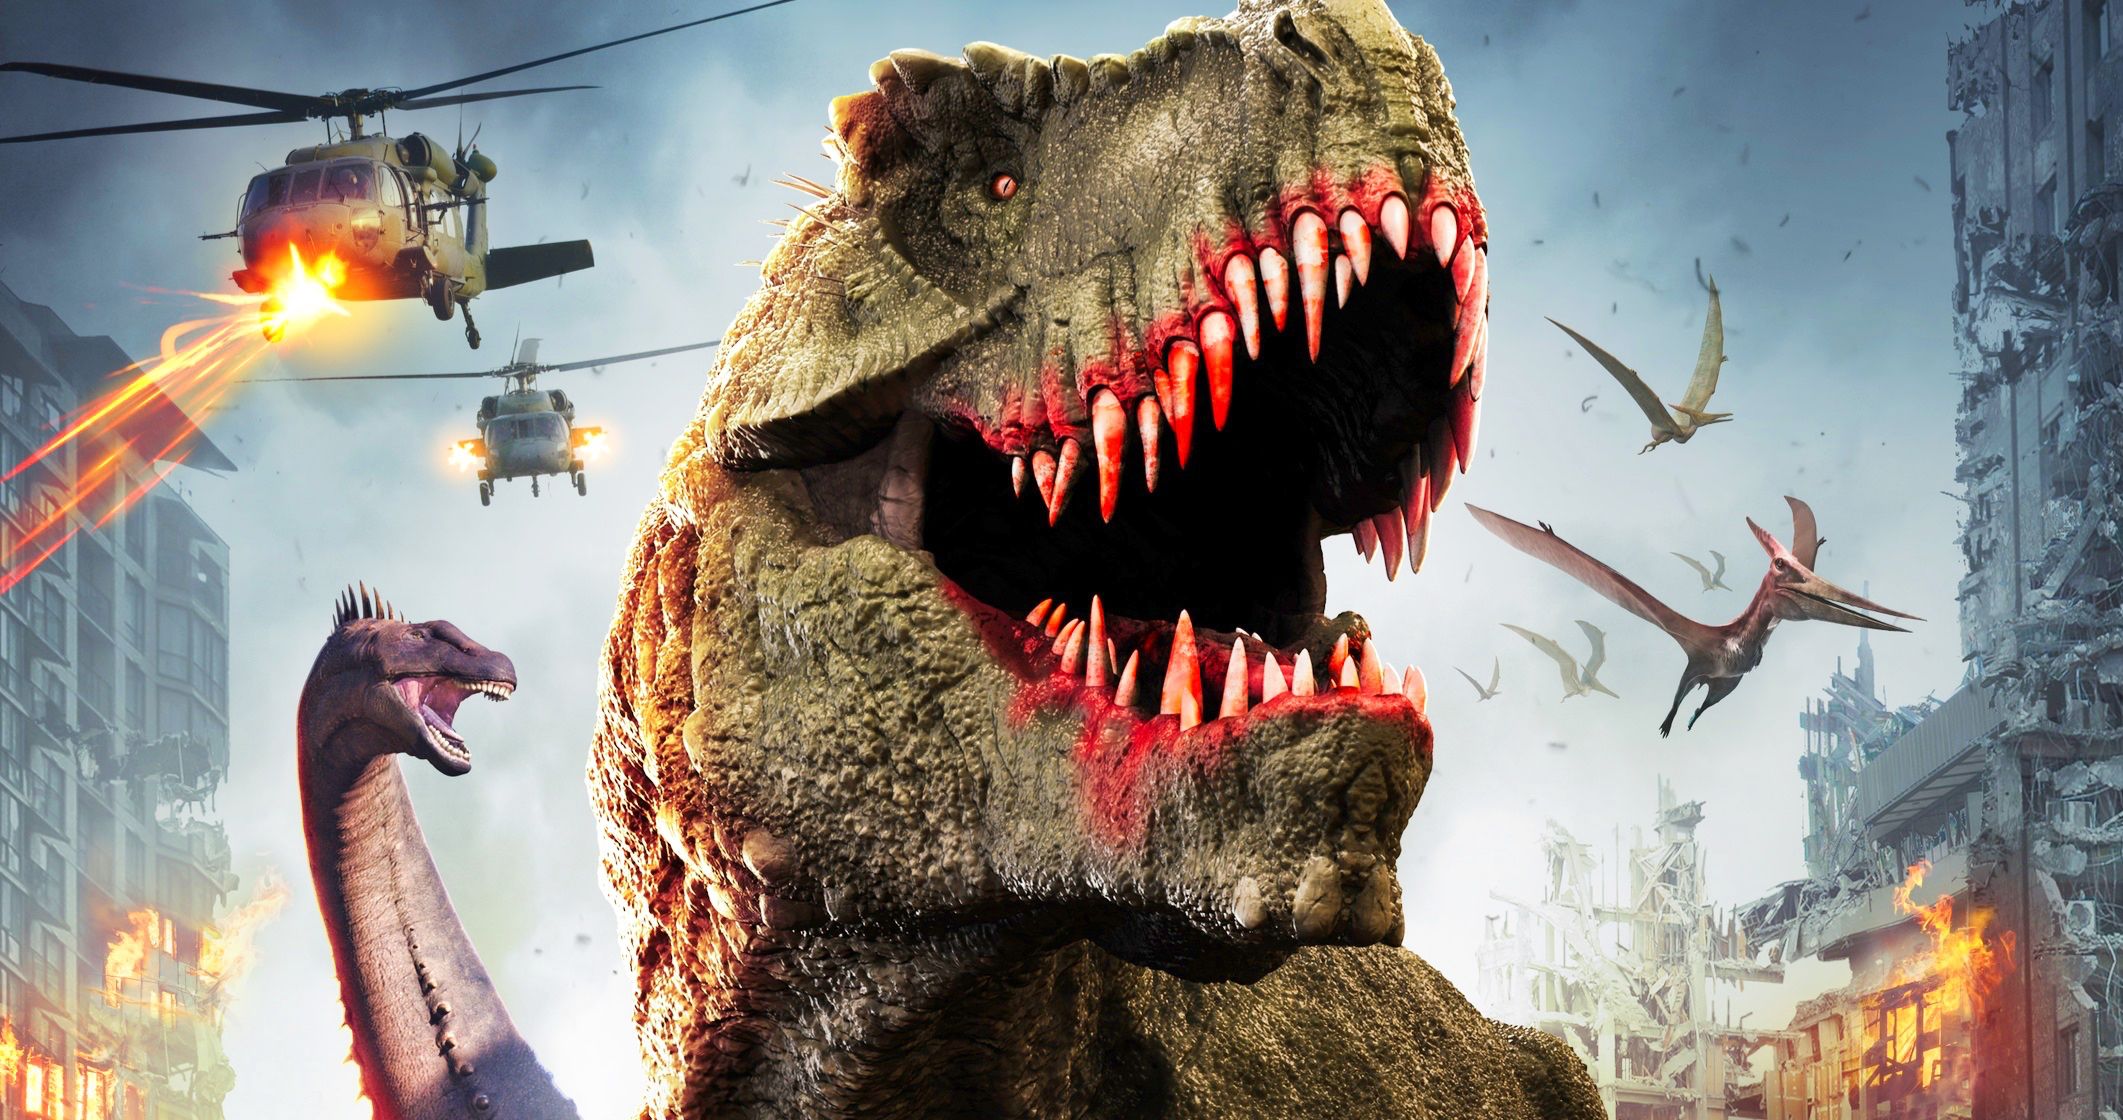 Jurassic Thunder Trailer Unleashes Dinosaur Carnage with a Weaponized T-Rex